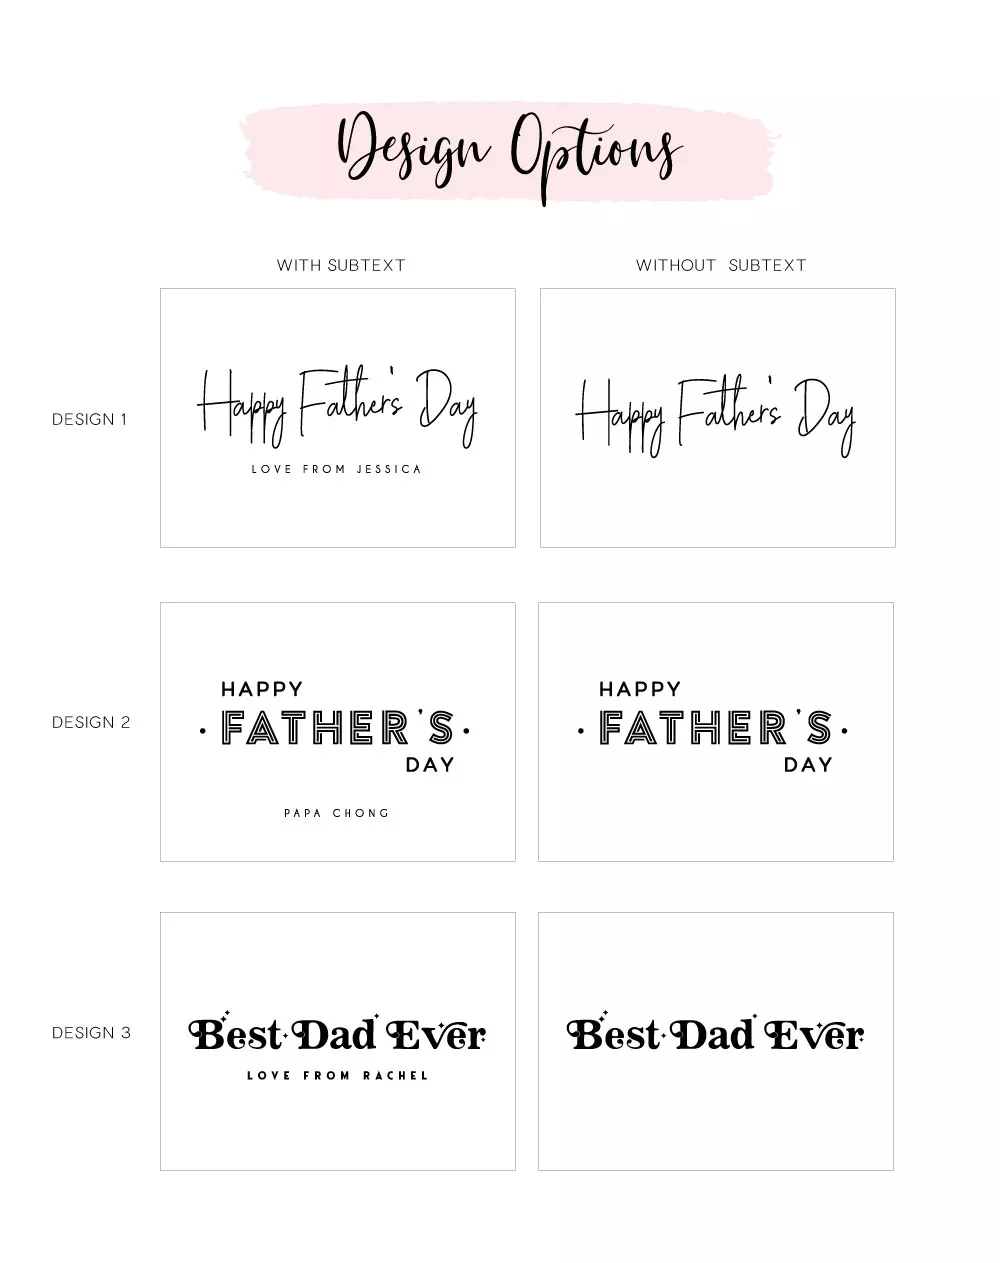 Custom Father's Day Gift Boxes Design Options